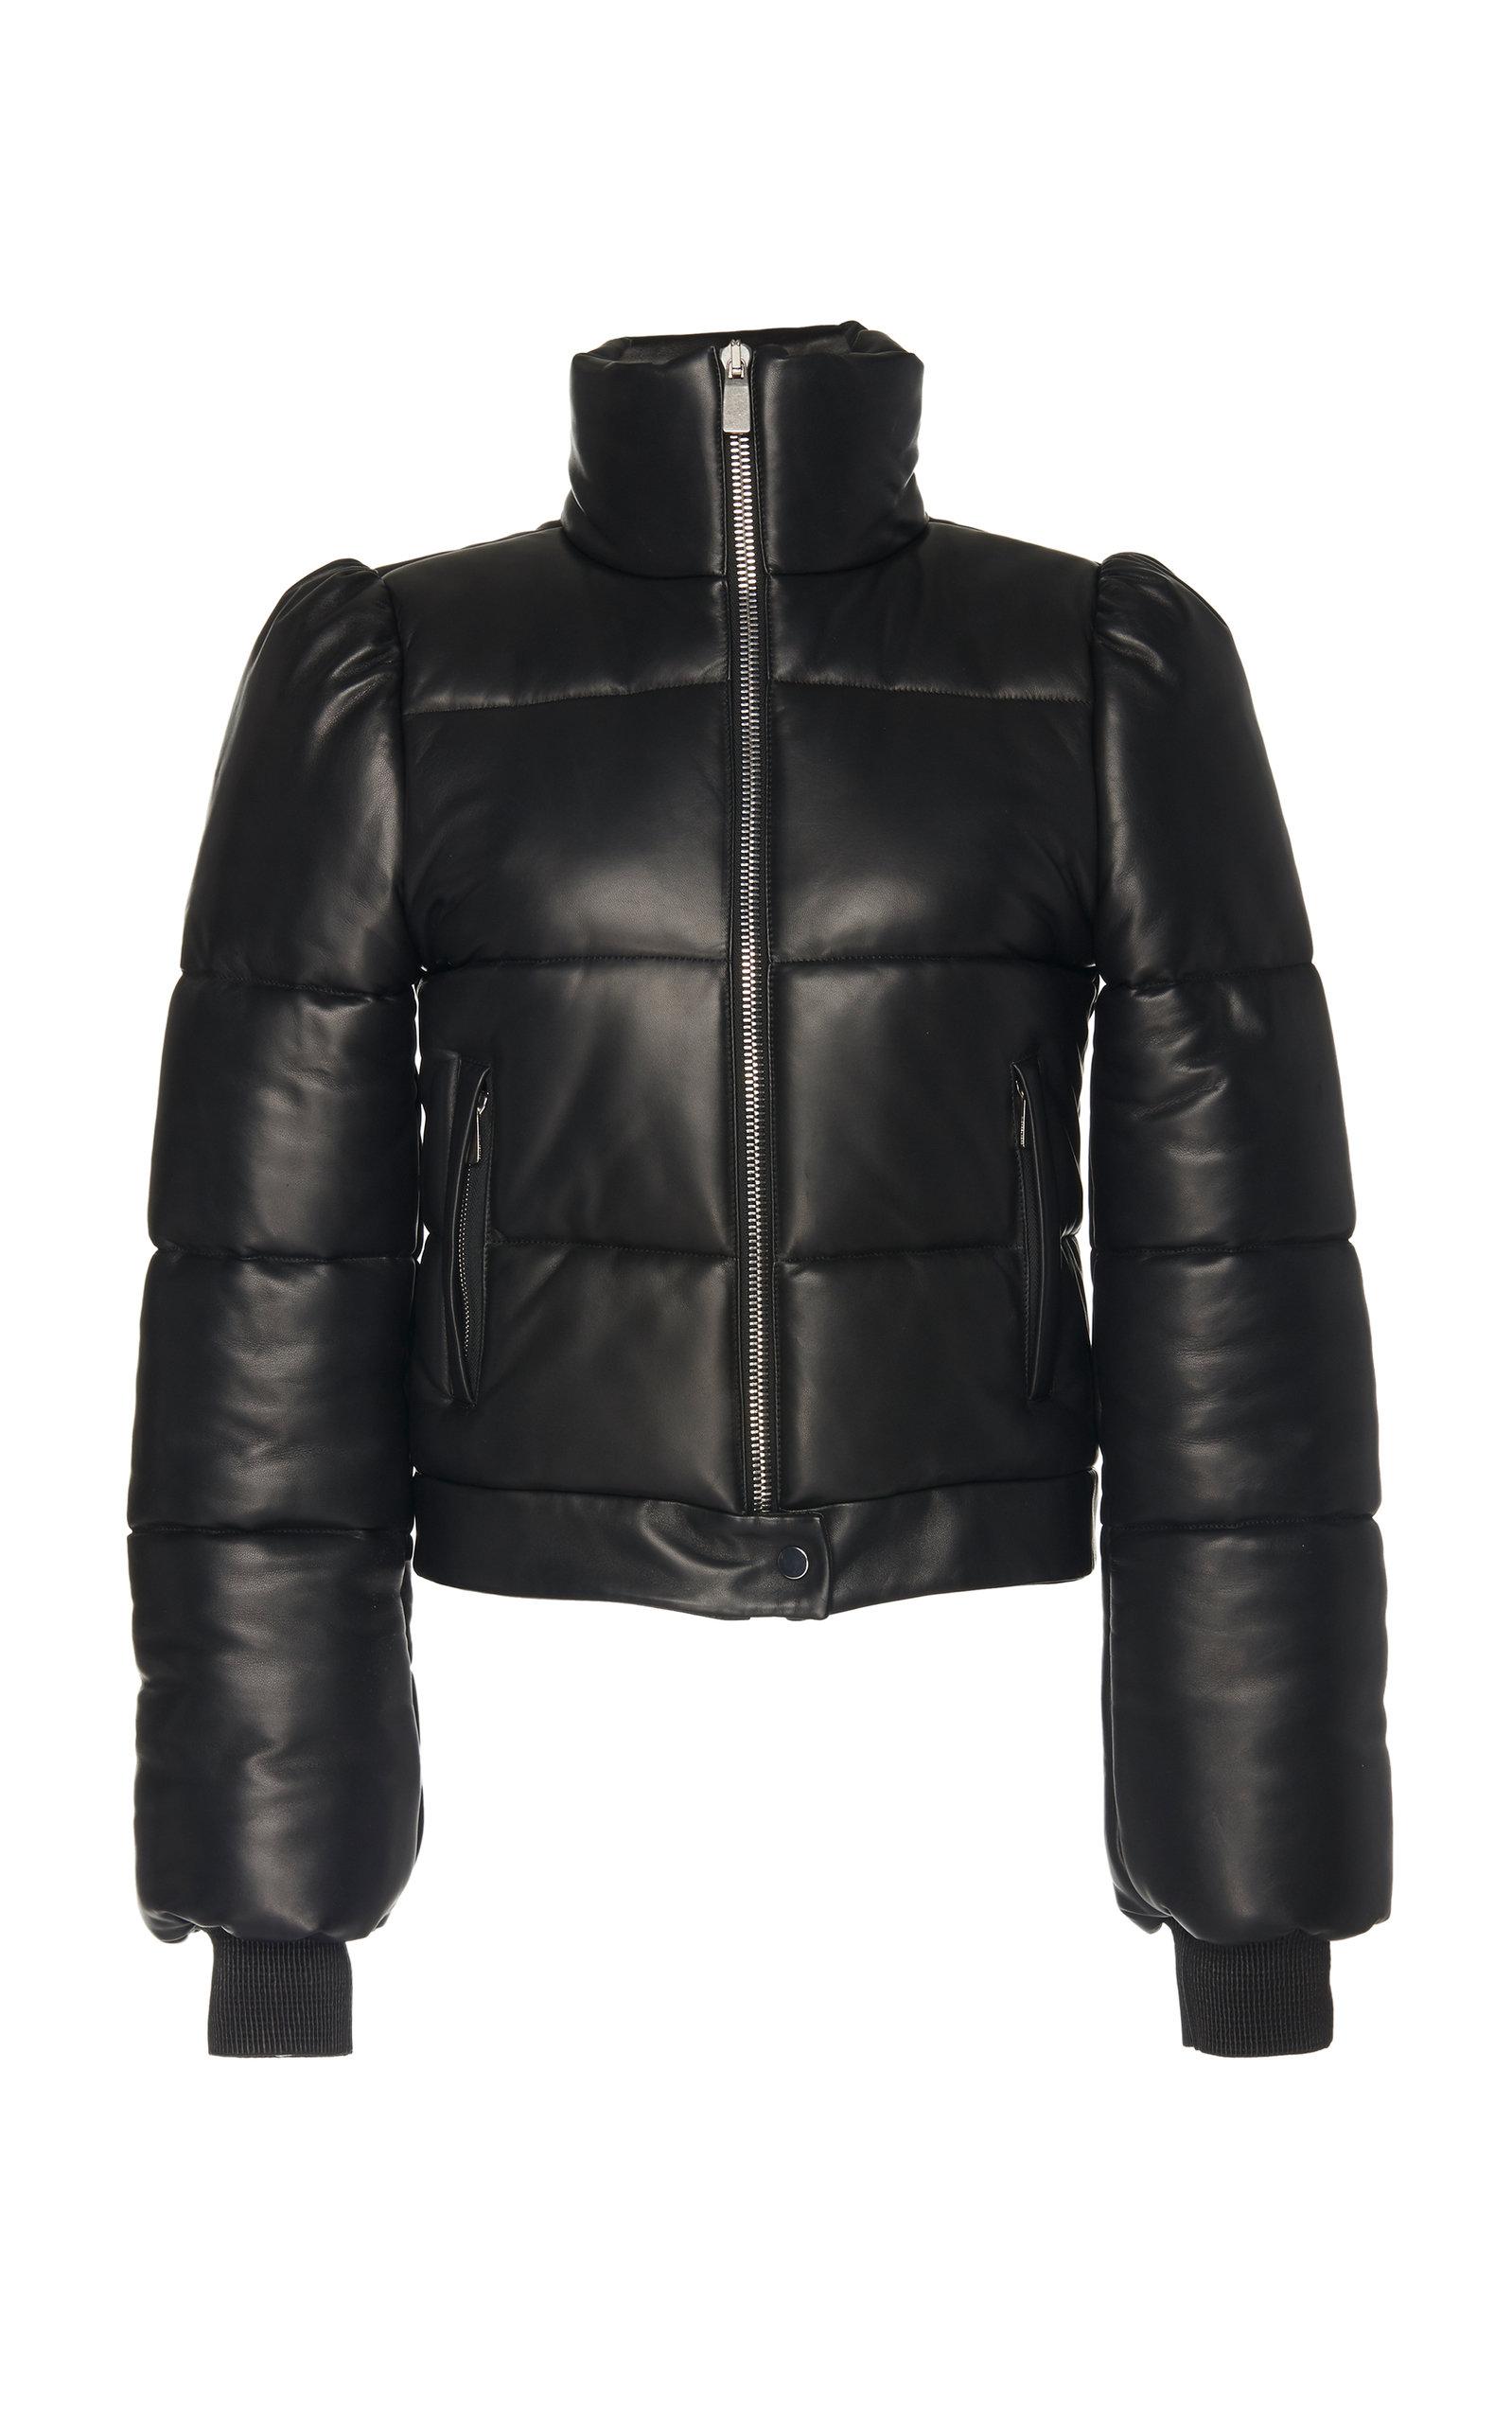 Michael Kors Collared Leather Puffer Jacket in Black - Lyst